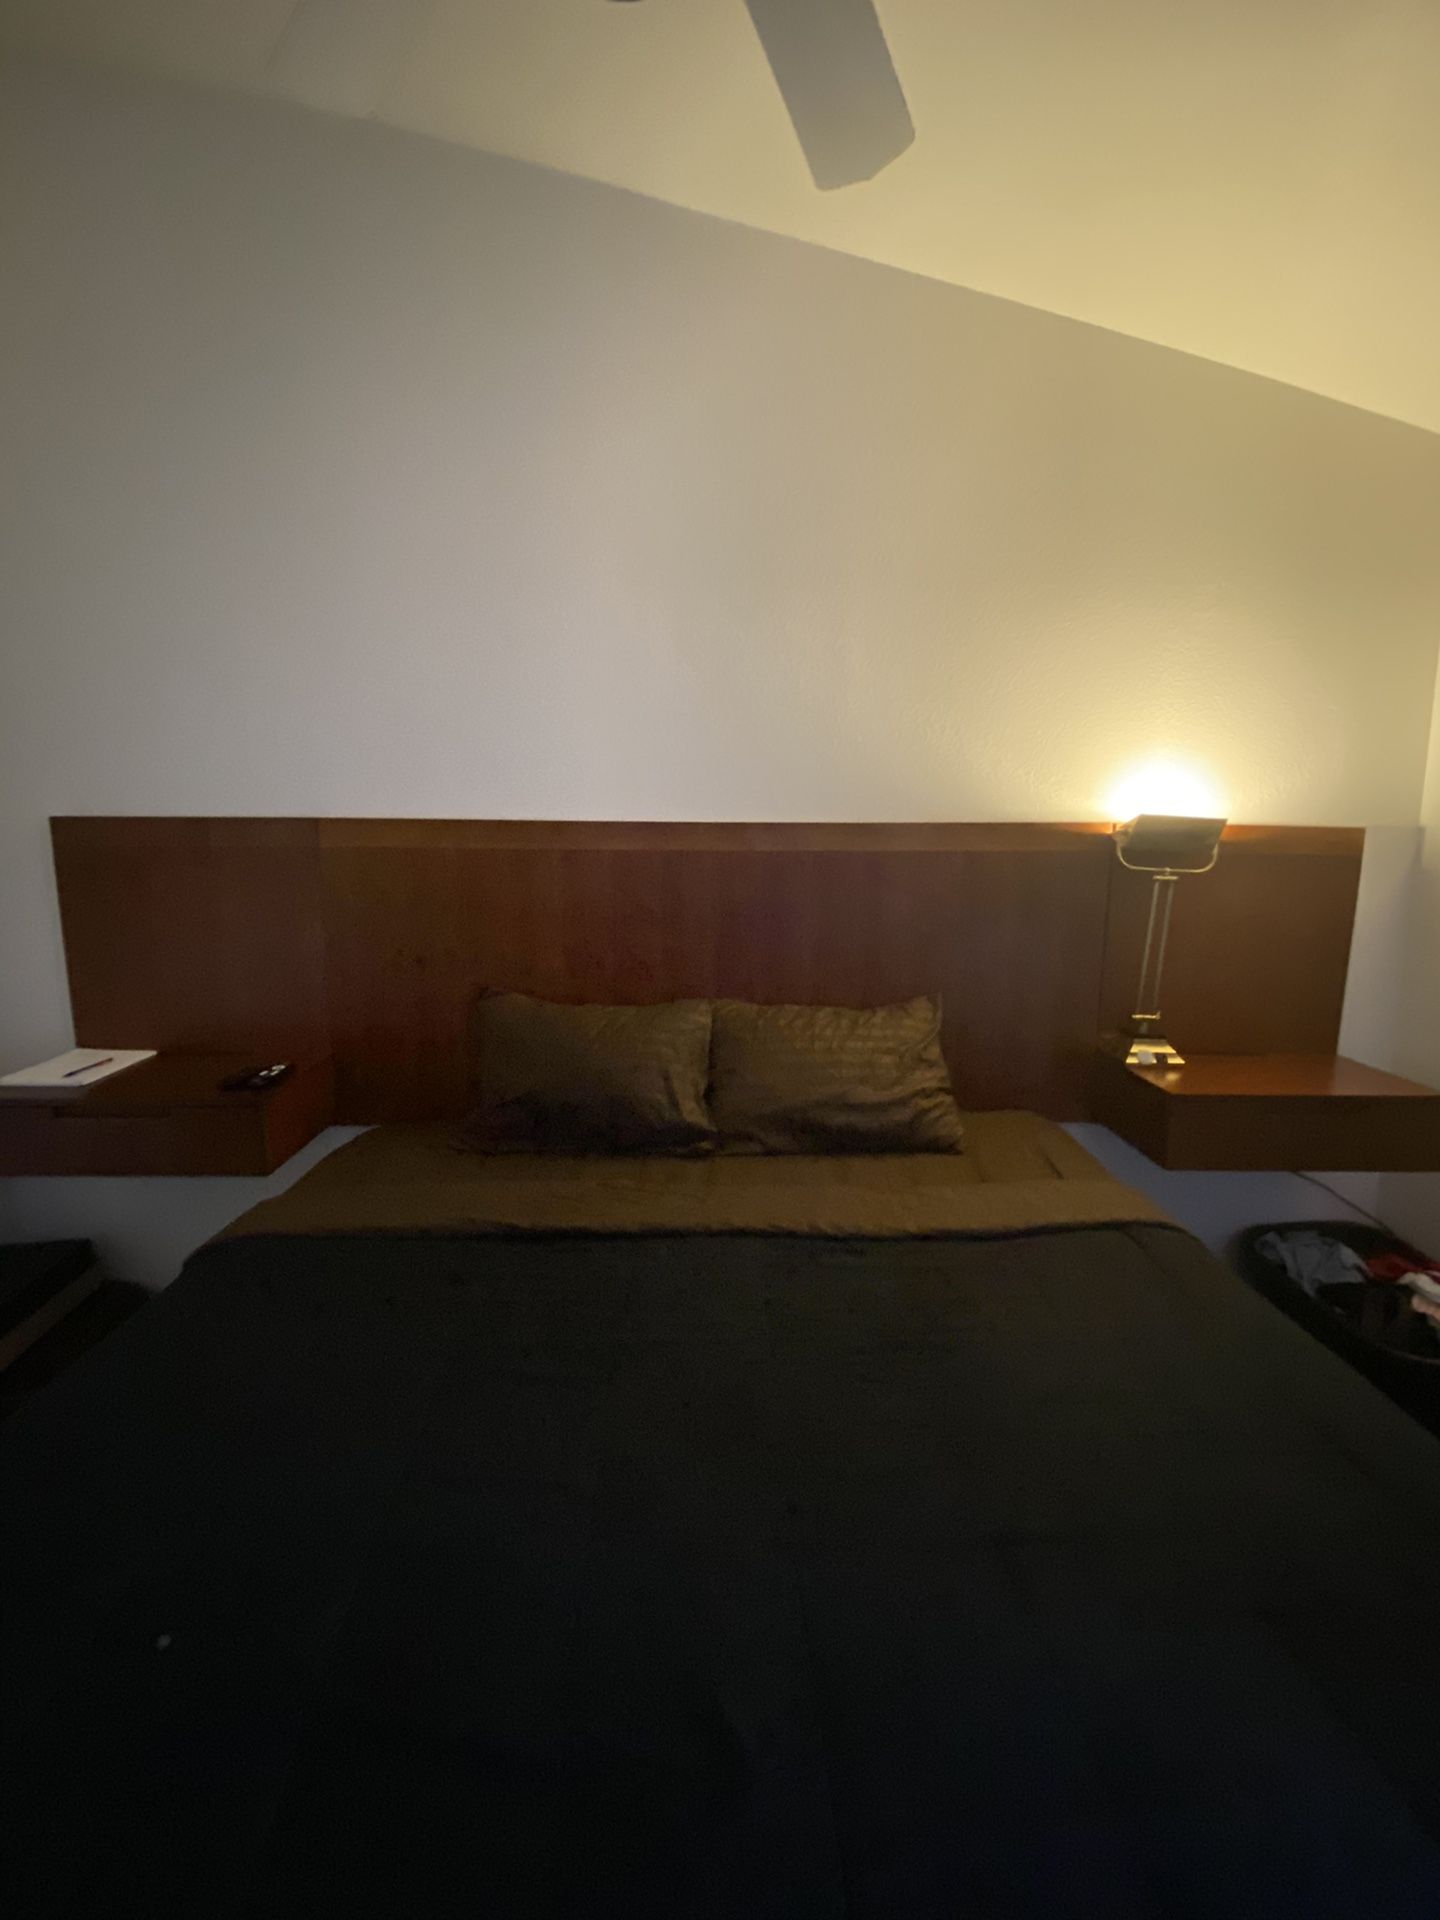 Floating Headboard And Night Stands